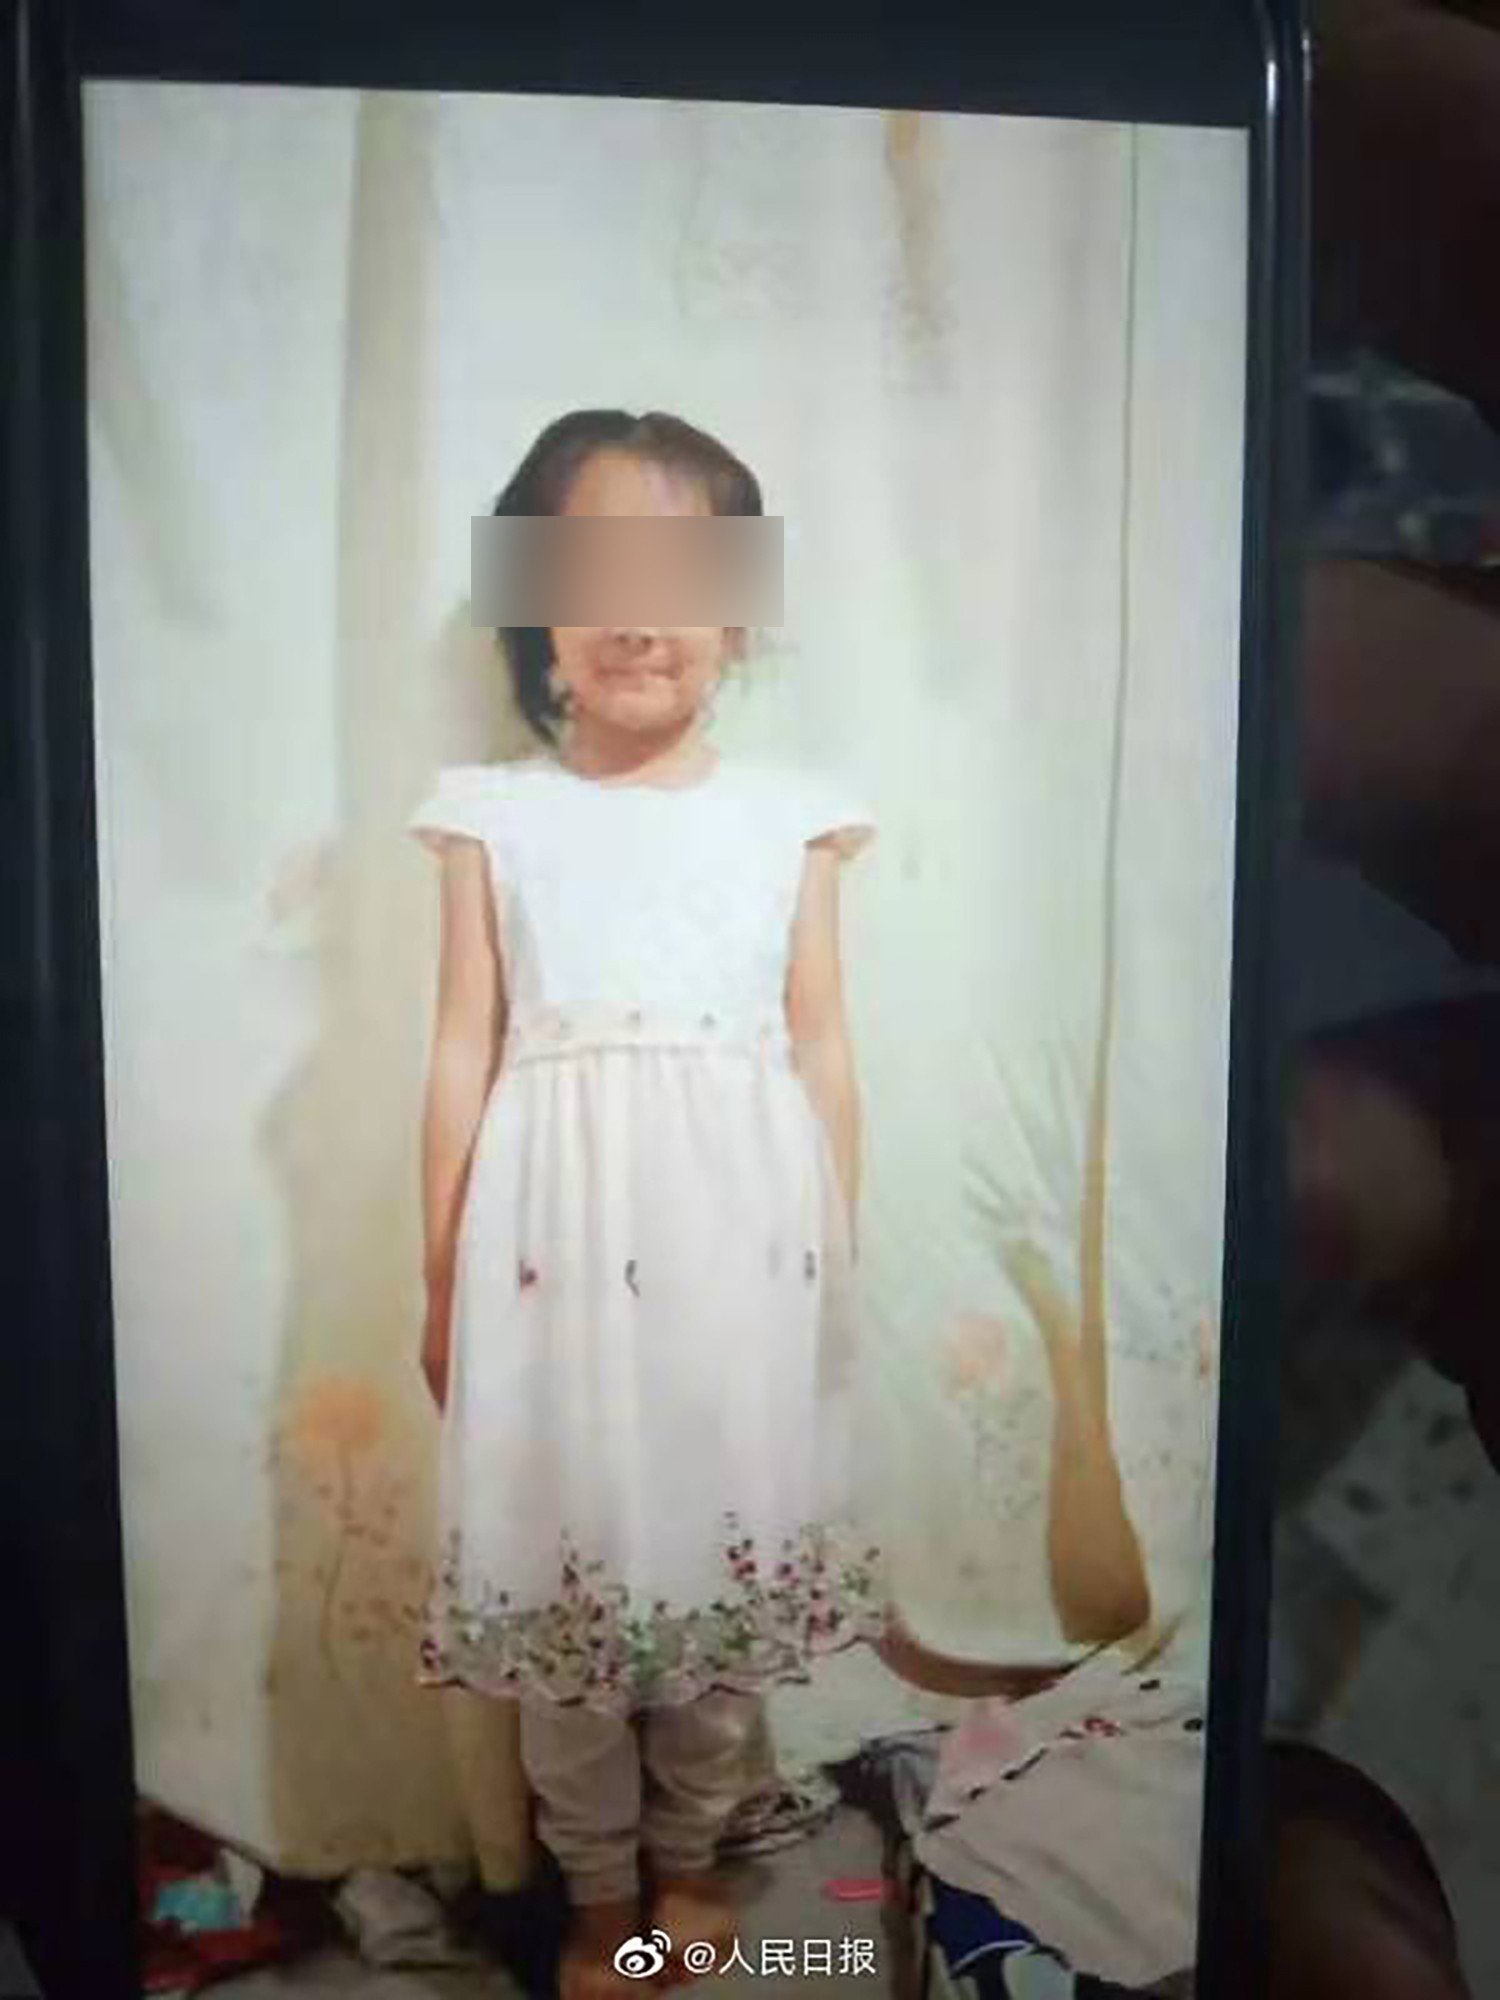 The six-year-old was found dead in an abandoned home a day after she went missing. Photo: Weibo